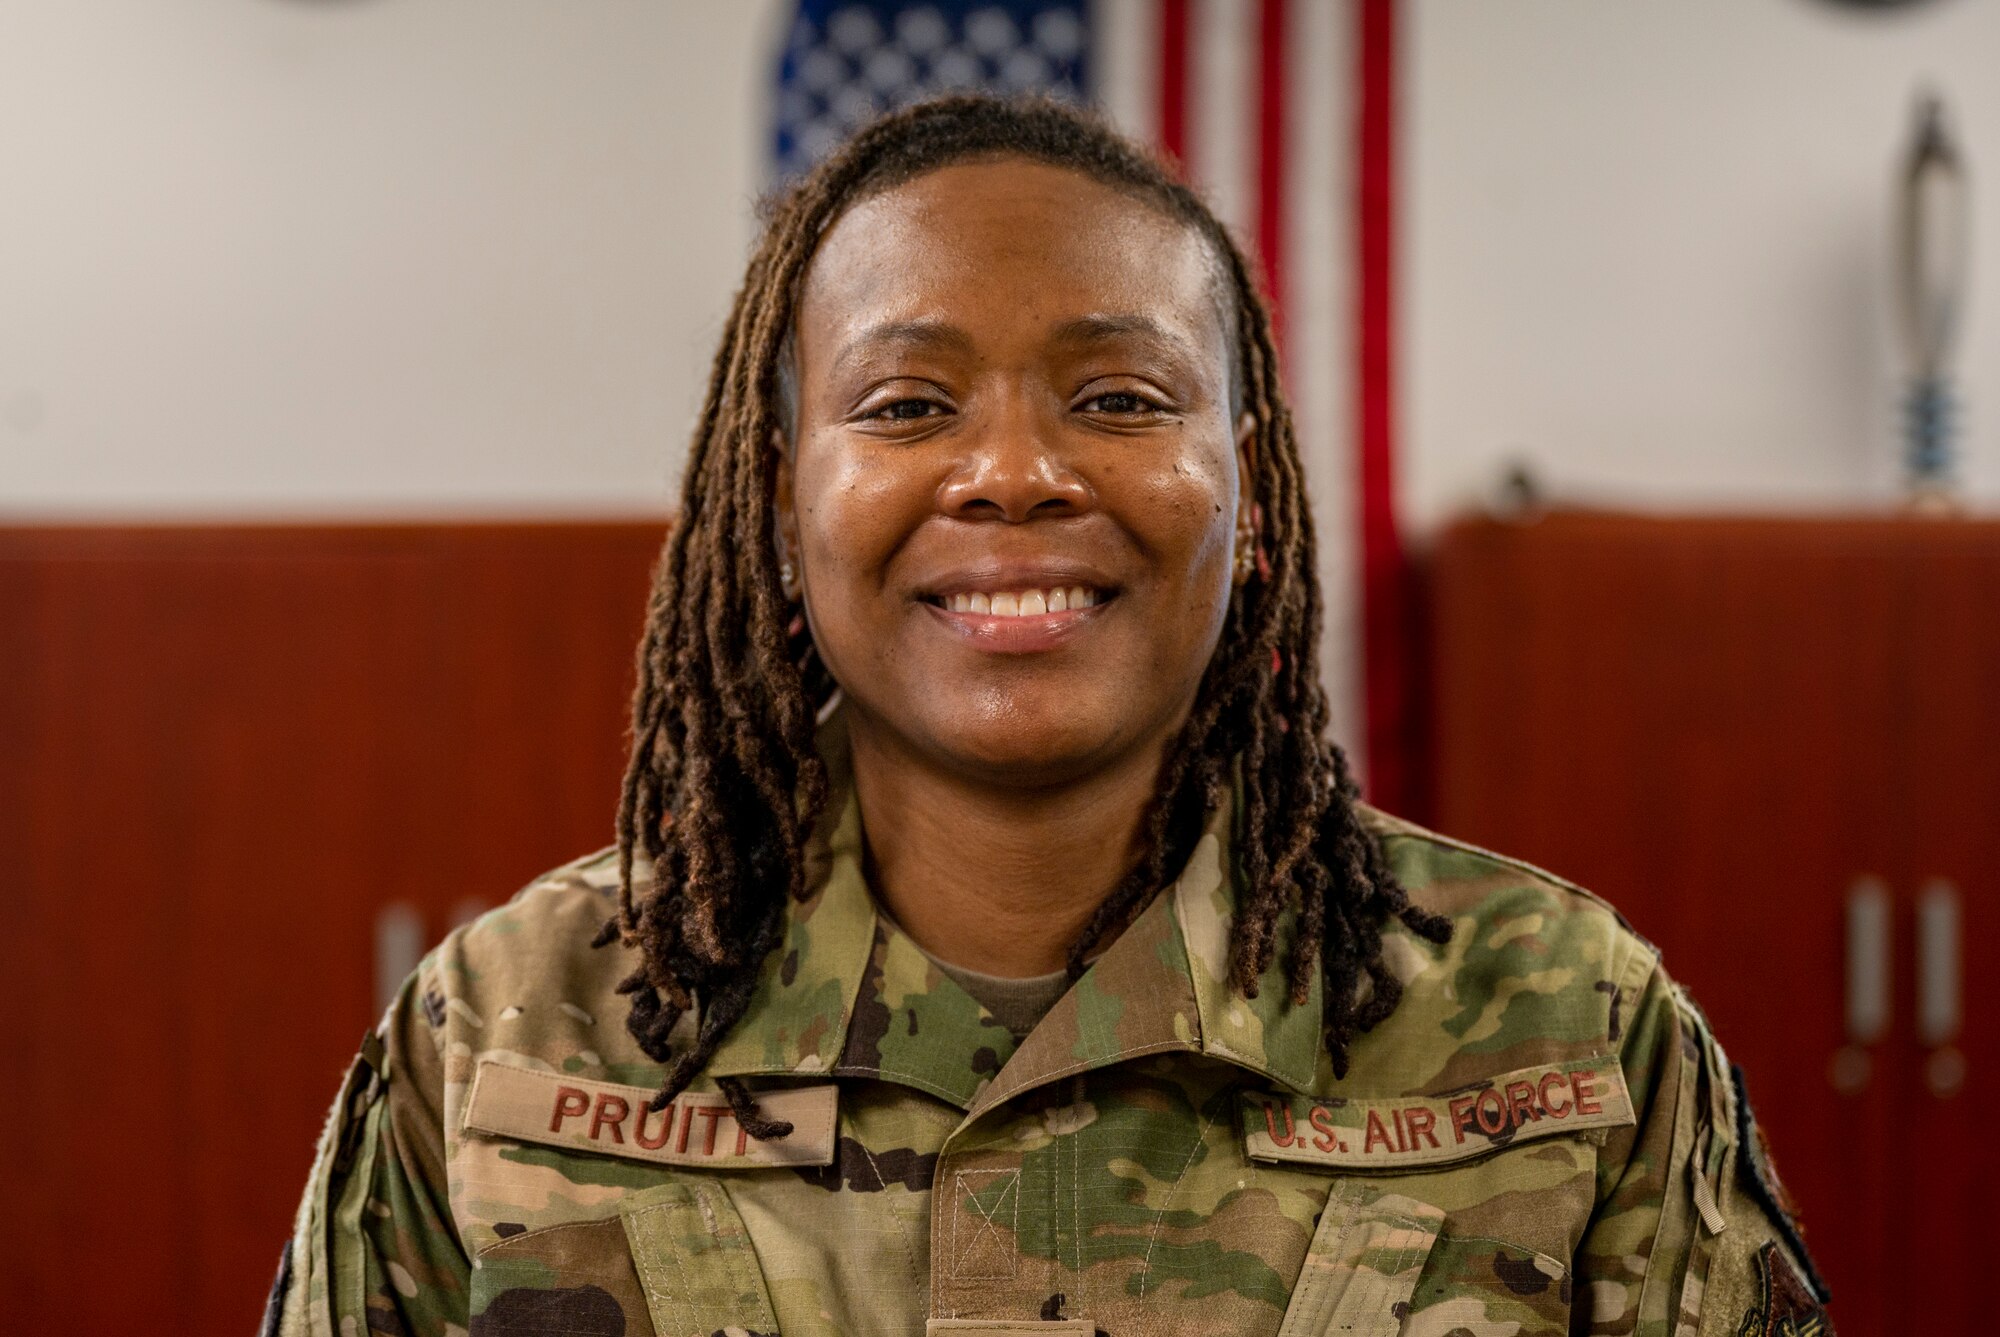 U.S. Air Force Master Sgt. Alauna Pruitt, 51st Security Forces Squadron, elite guard section chief, poses for a photo in celebration of Women’s History Month at Osan Air Base, Republic of Korea, March 27, 2023.